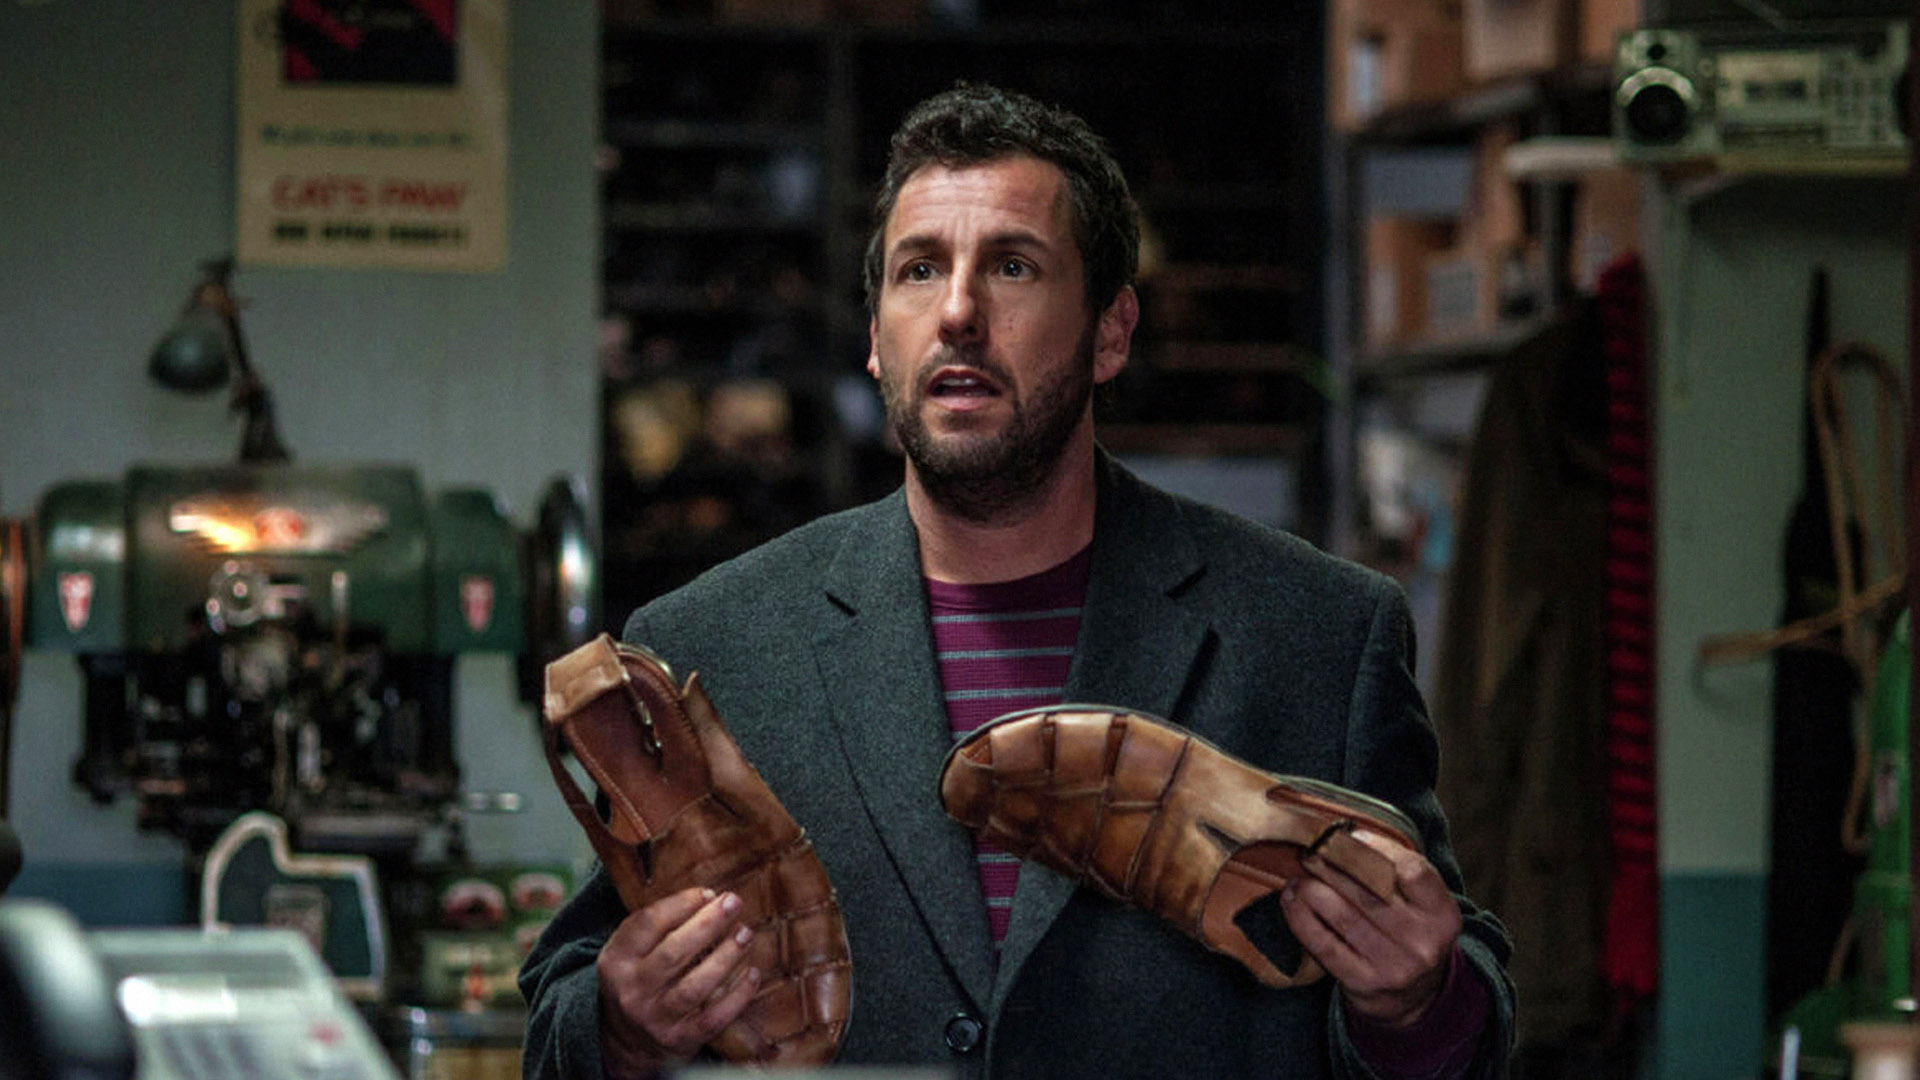 8 Worst Adam Sandler Movies, Ranked From Bad to Absolute Disaster